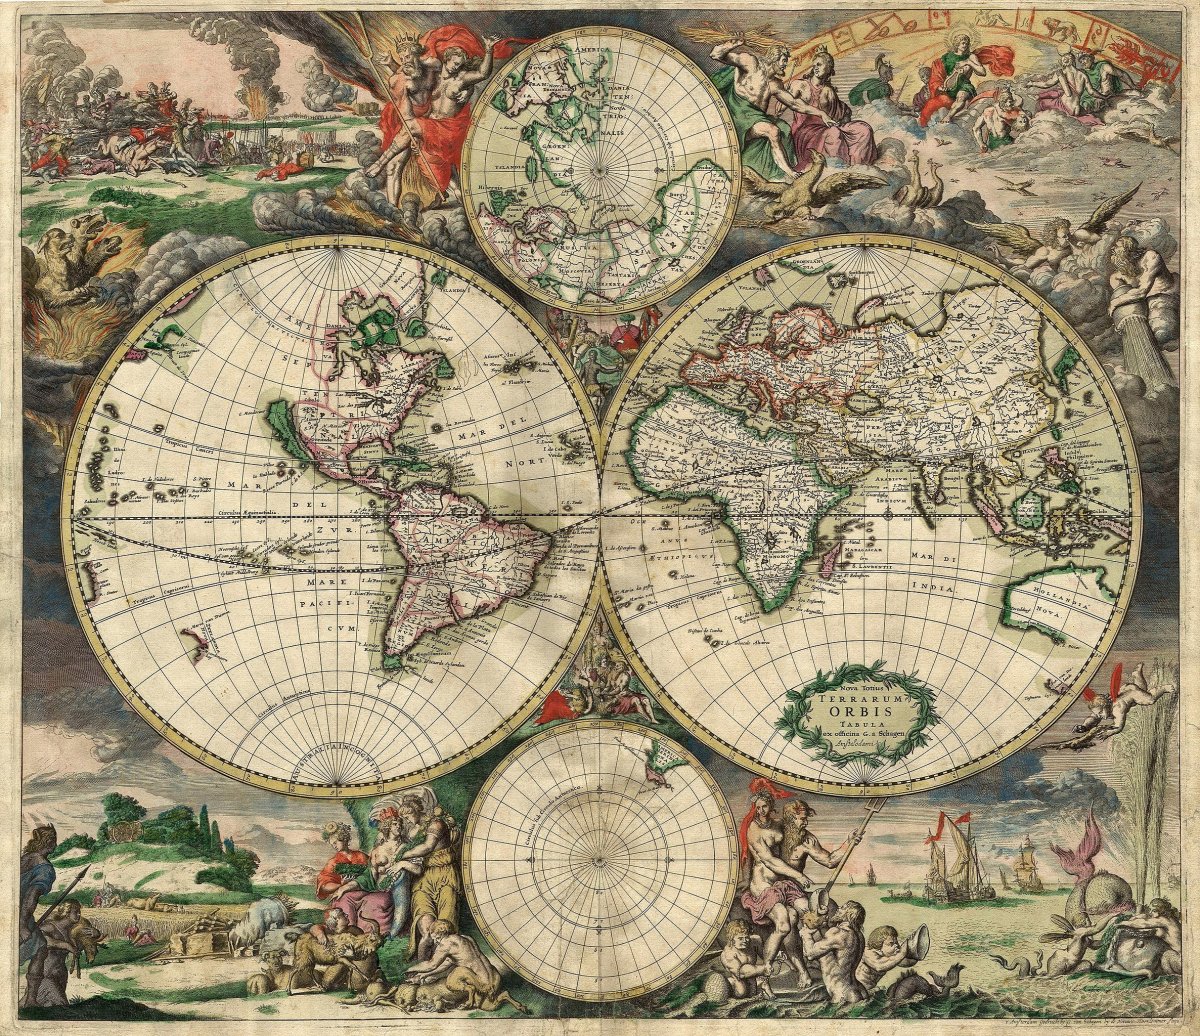 The Flagrant Piracy Of Rare, Antique Maps, And Books